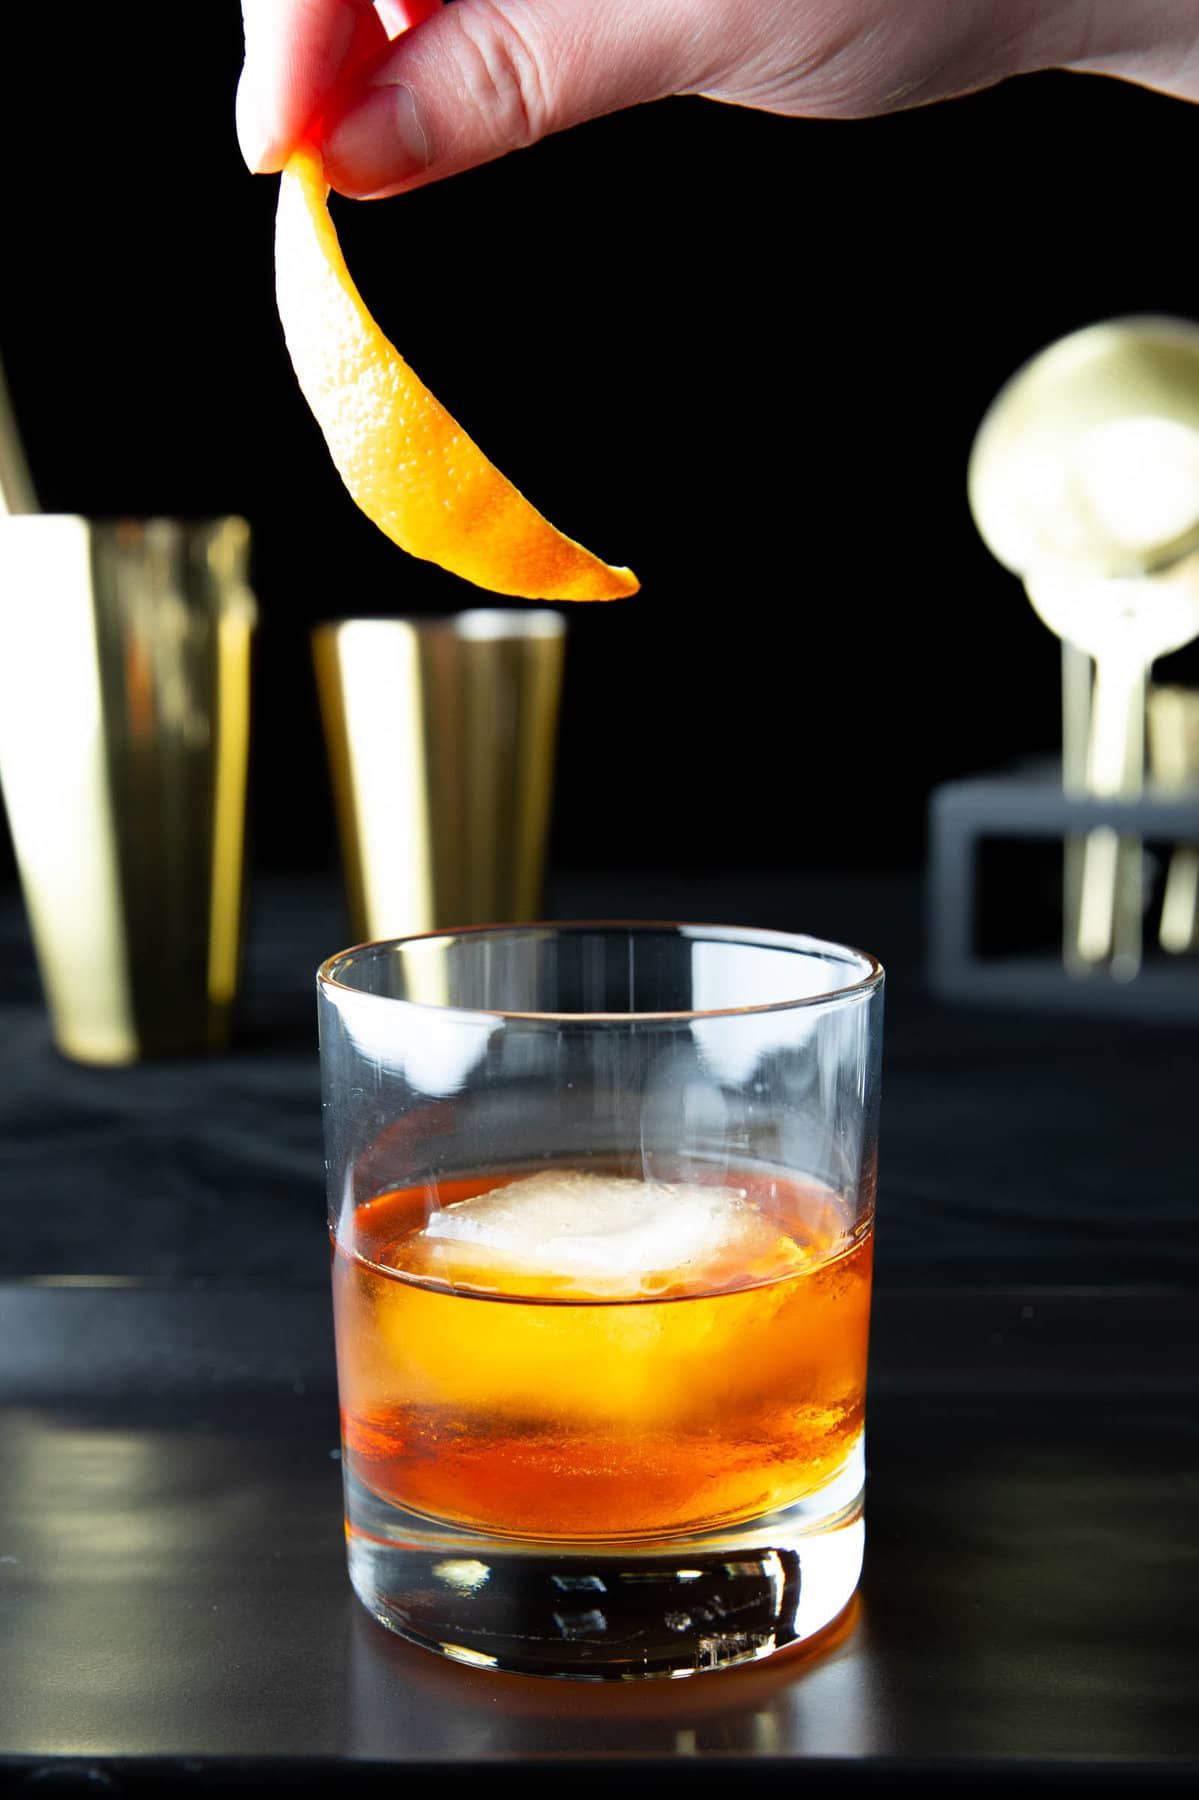 A hand adding an orange peel garnish to this Old Fashioned drink recipe